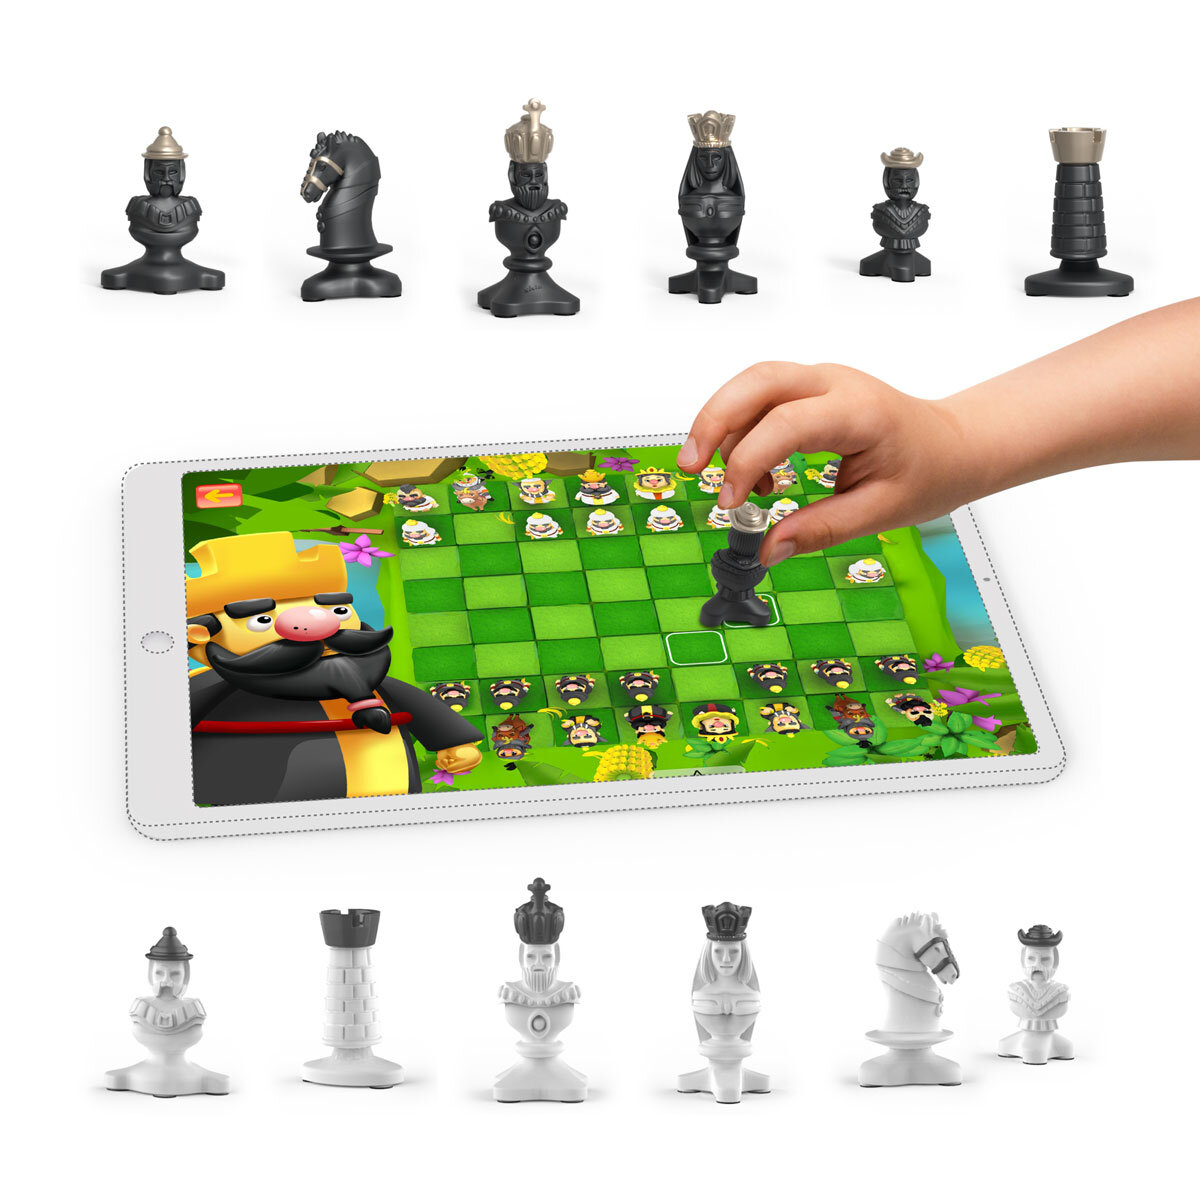 Buy Tacto Chess Features Image at Costco.co.uk